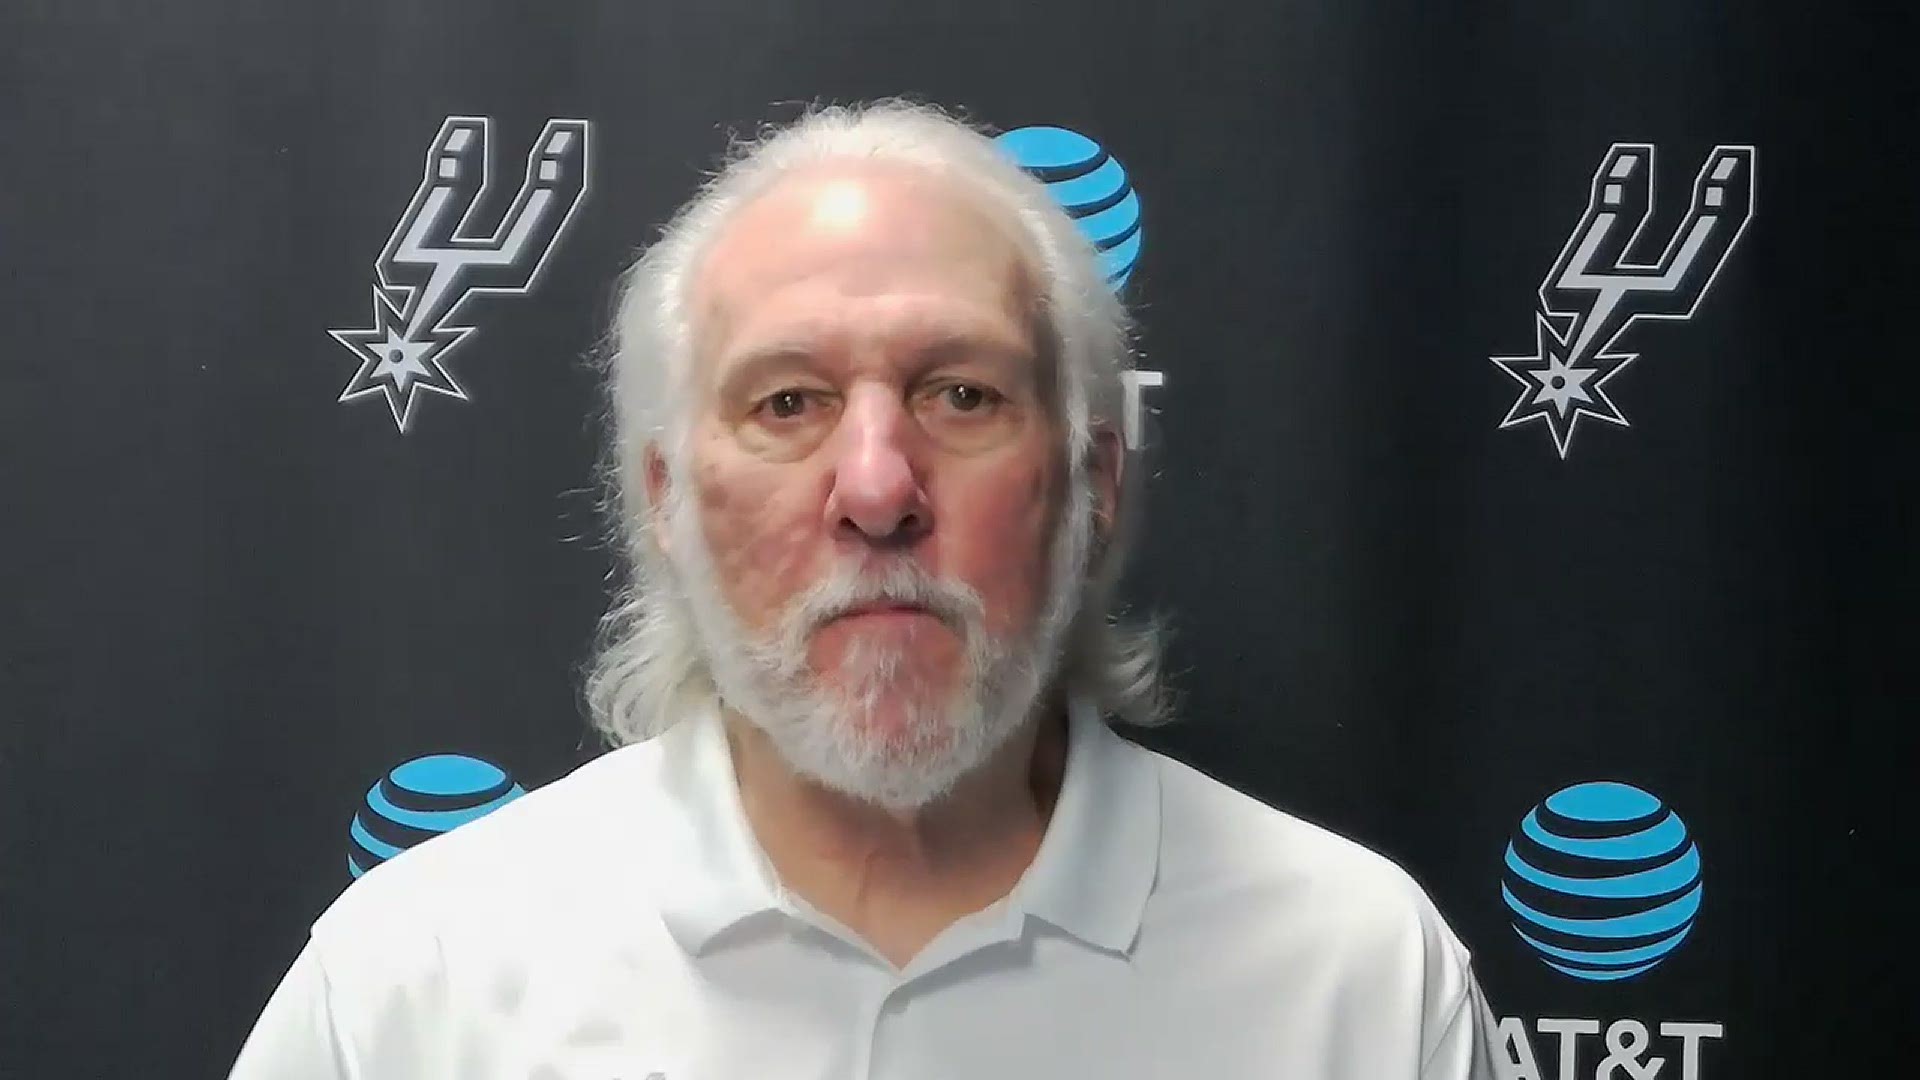 Pop spoke about basketball, coronavirus, politics, and maintaining perspective after a difficult year.